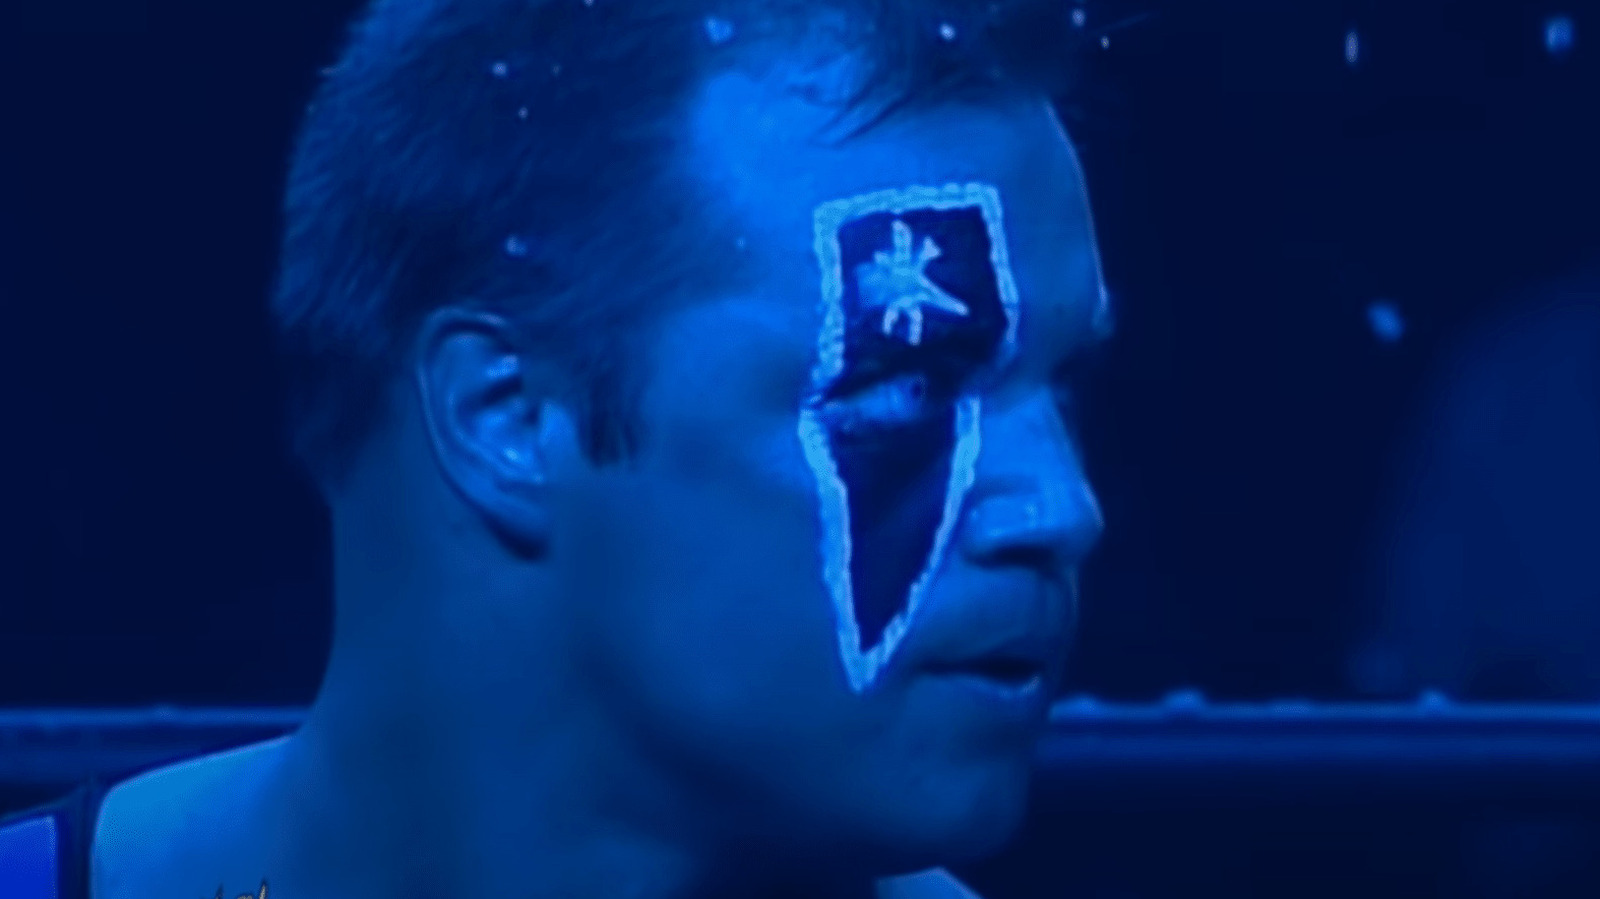 Glacier Says Midway Games Threatened To Sue WCW Over His Resemblance To Sub-Zero